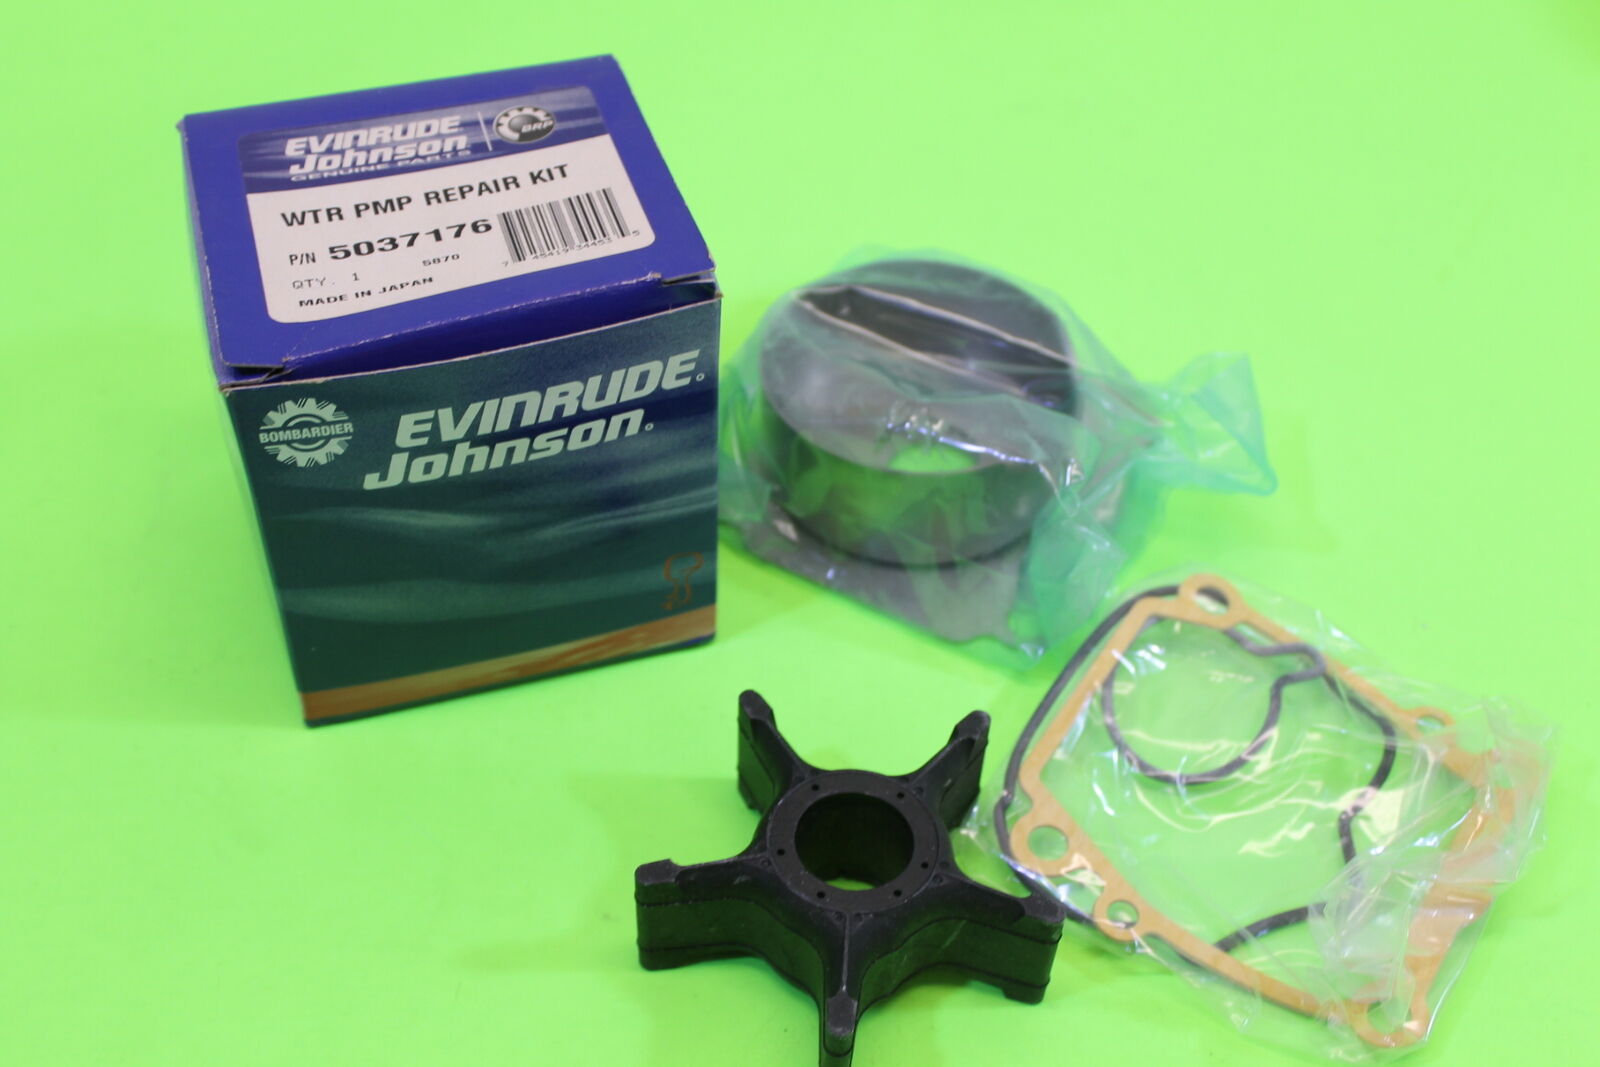 NEW Johnson or Evinrude Water pump kit for a outboard motor 5037176